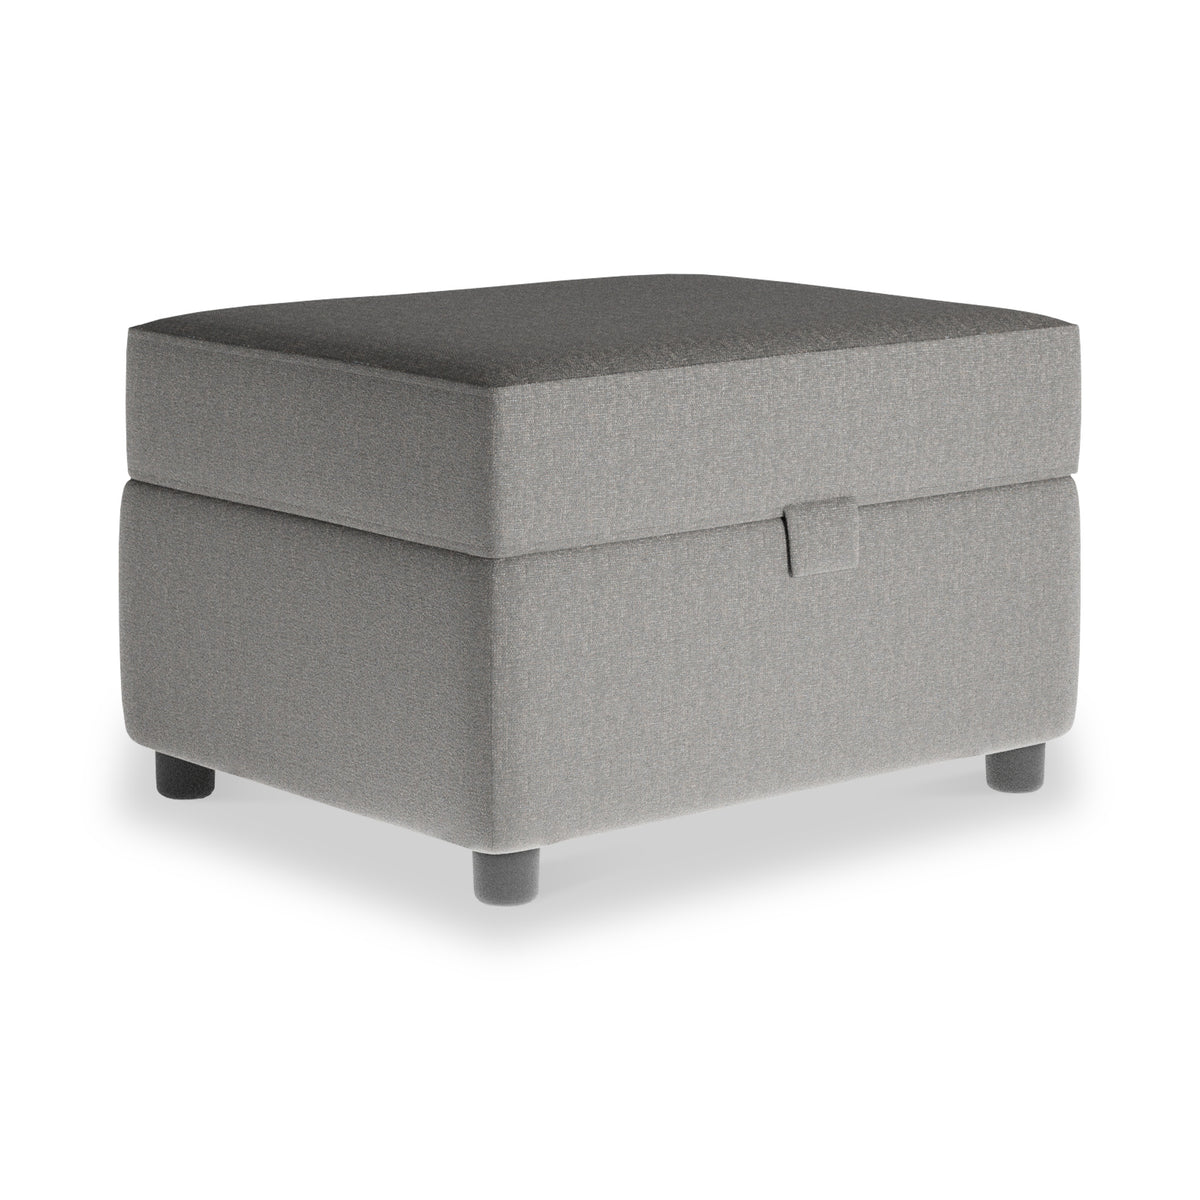 Jude Coal Small Storage Footstool from Roseland Furniture